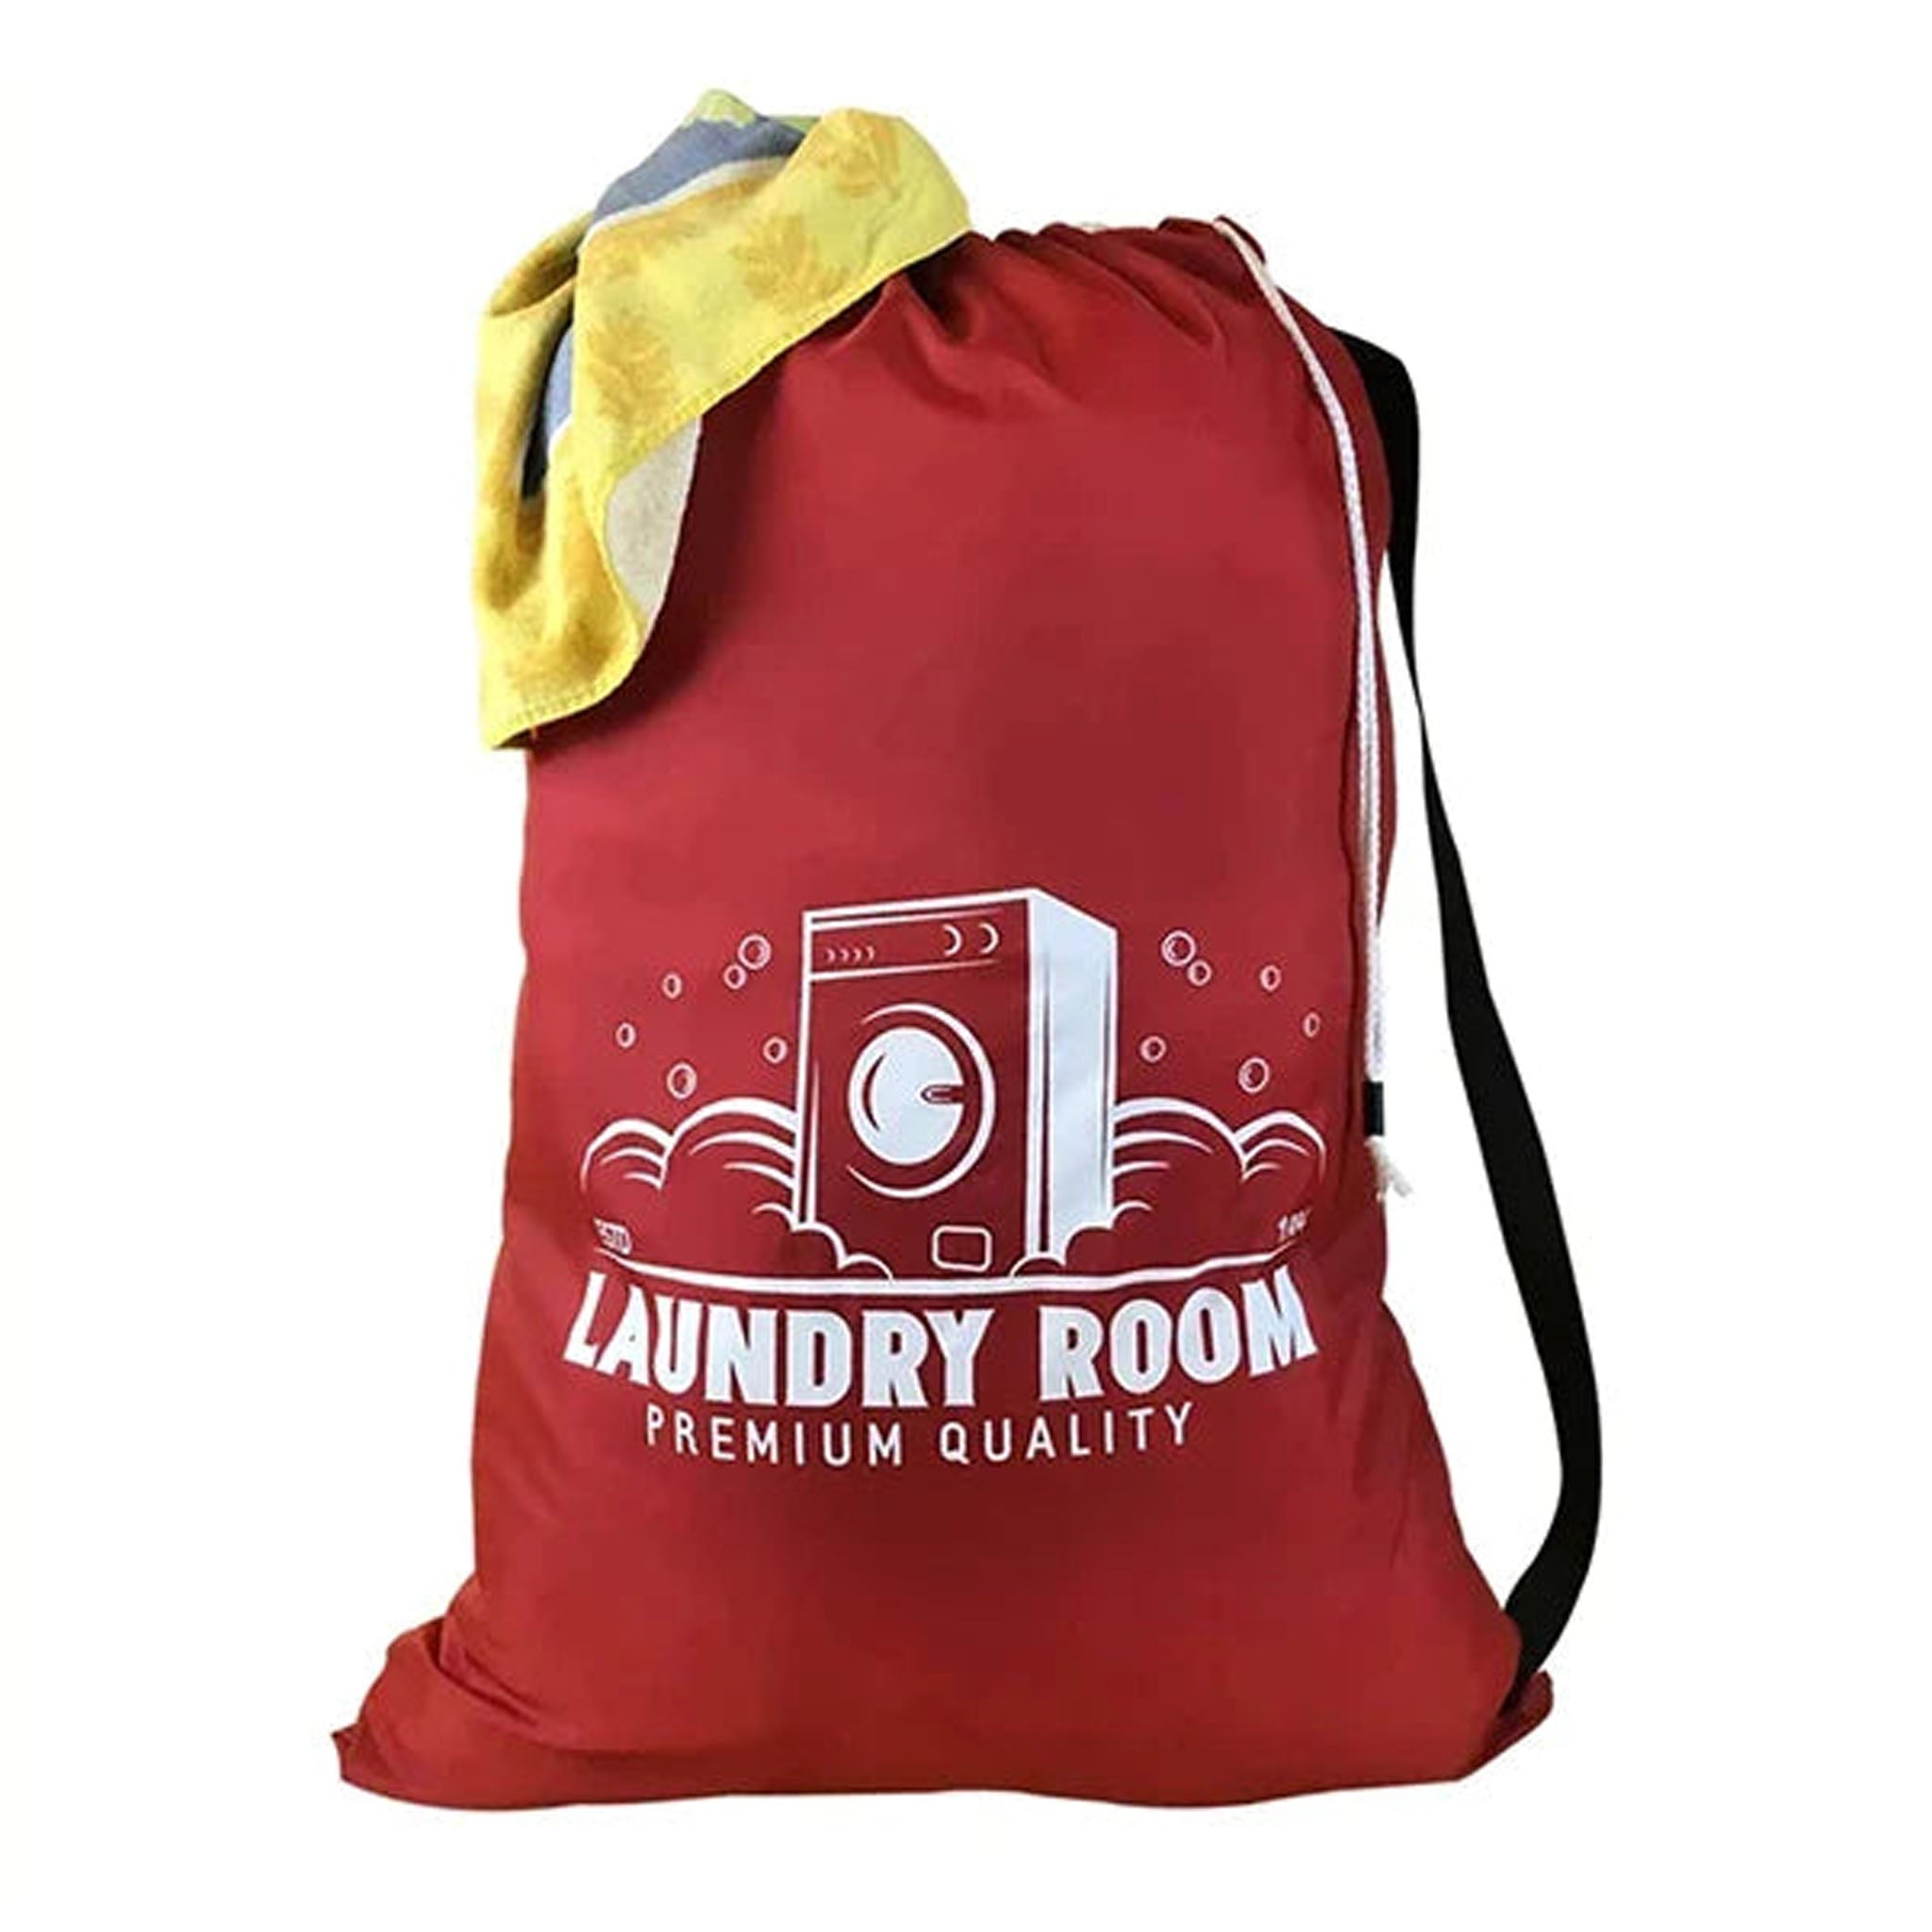 PRINTED LAUNDRY BAGS